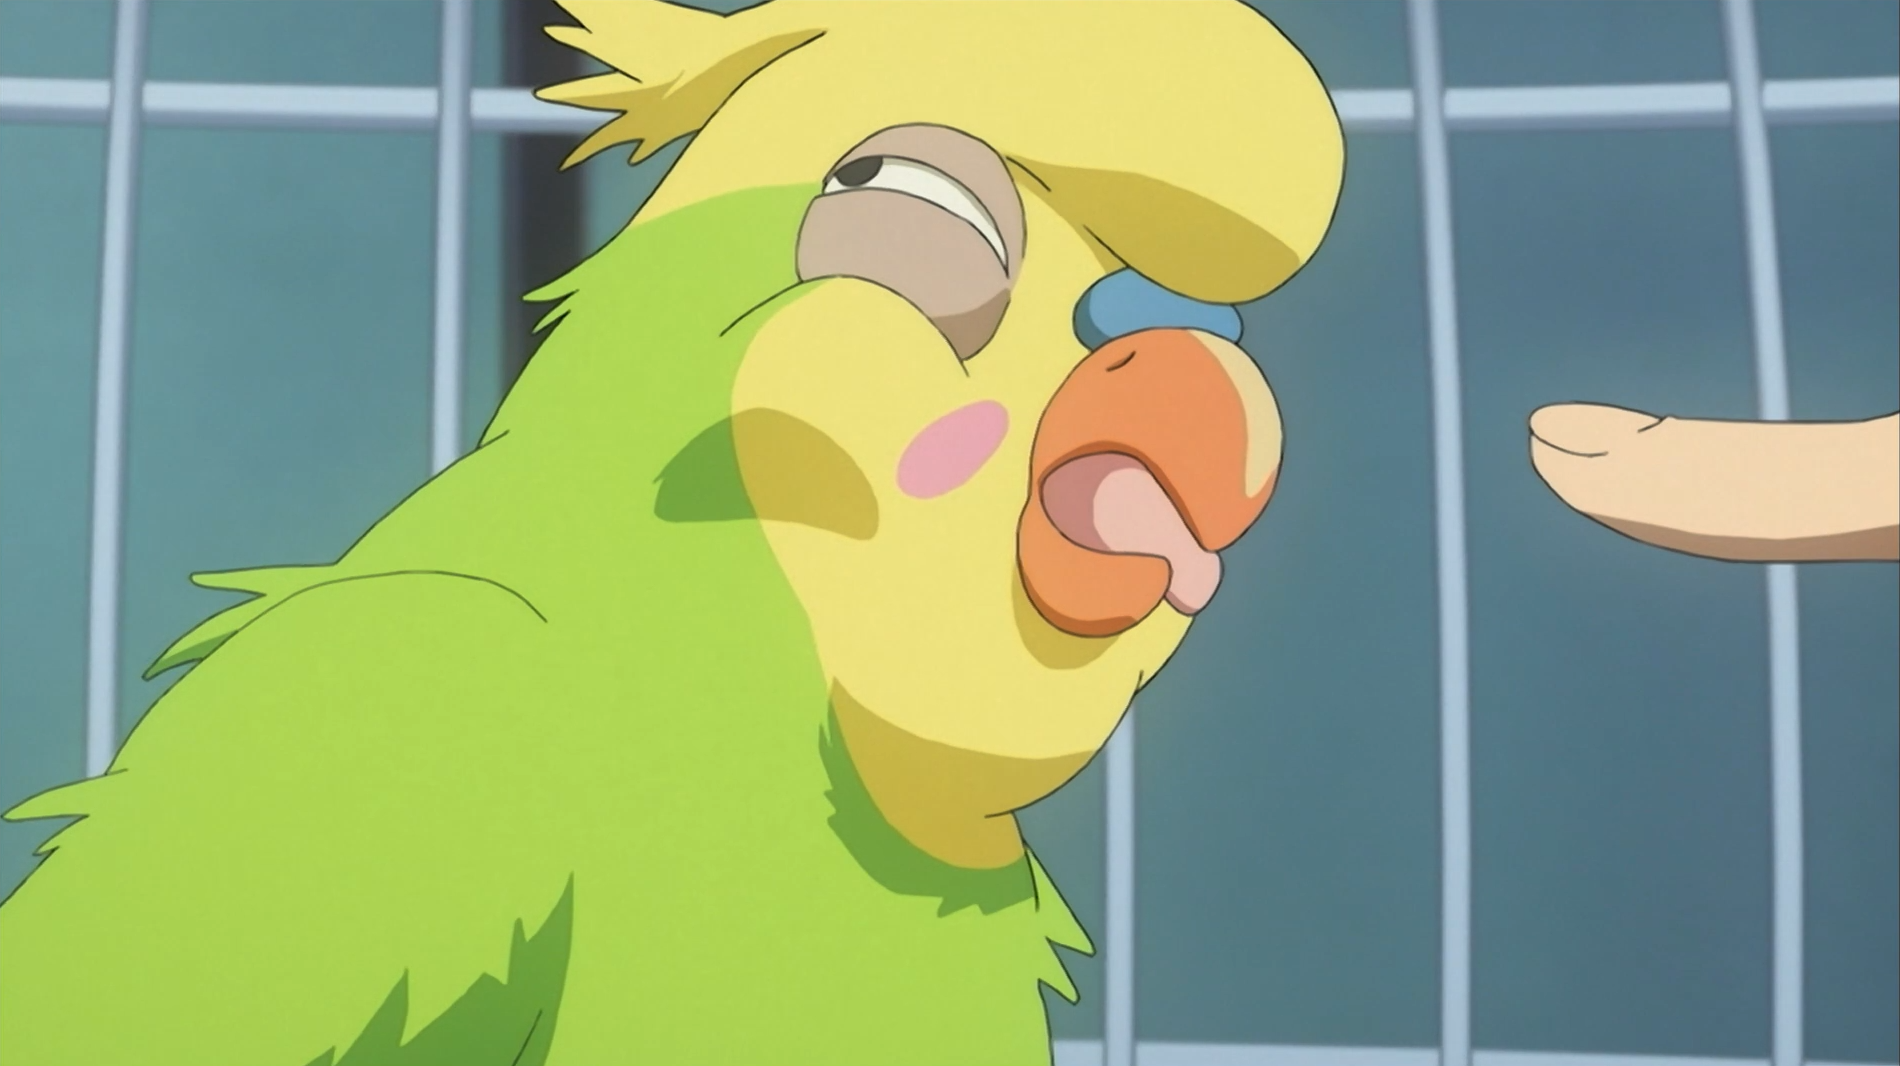 Inko the Parakeet prepares to snap at a visitor's outstretched finger in a scene from the Toradora! TV anime.